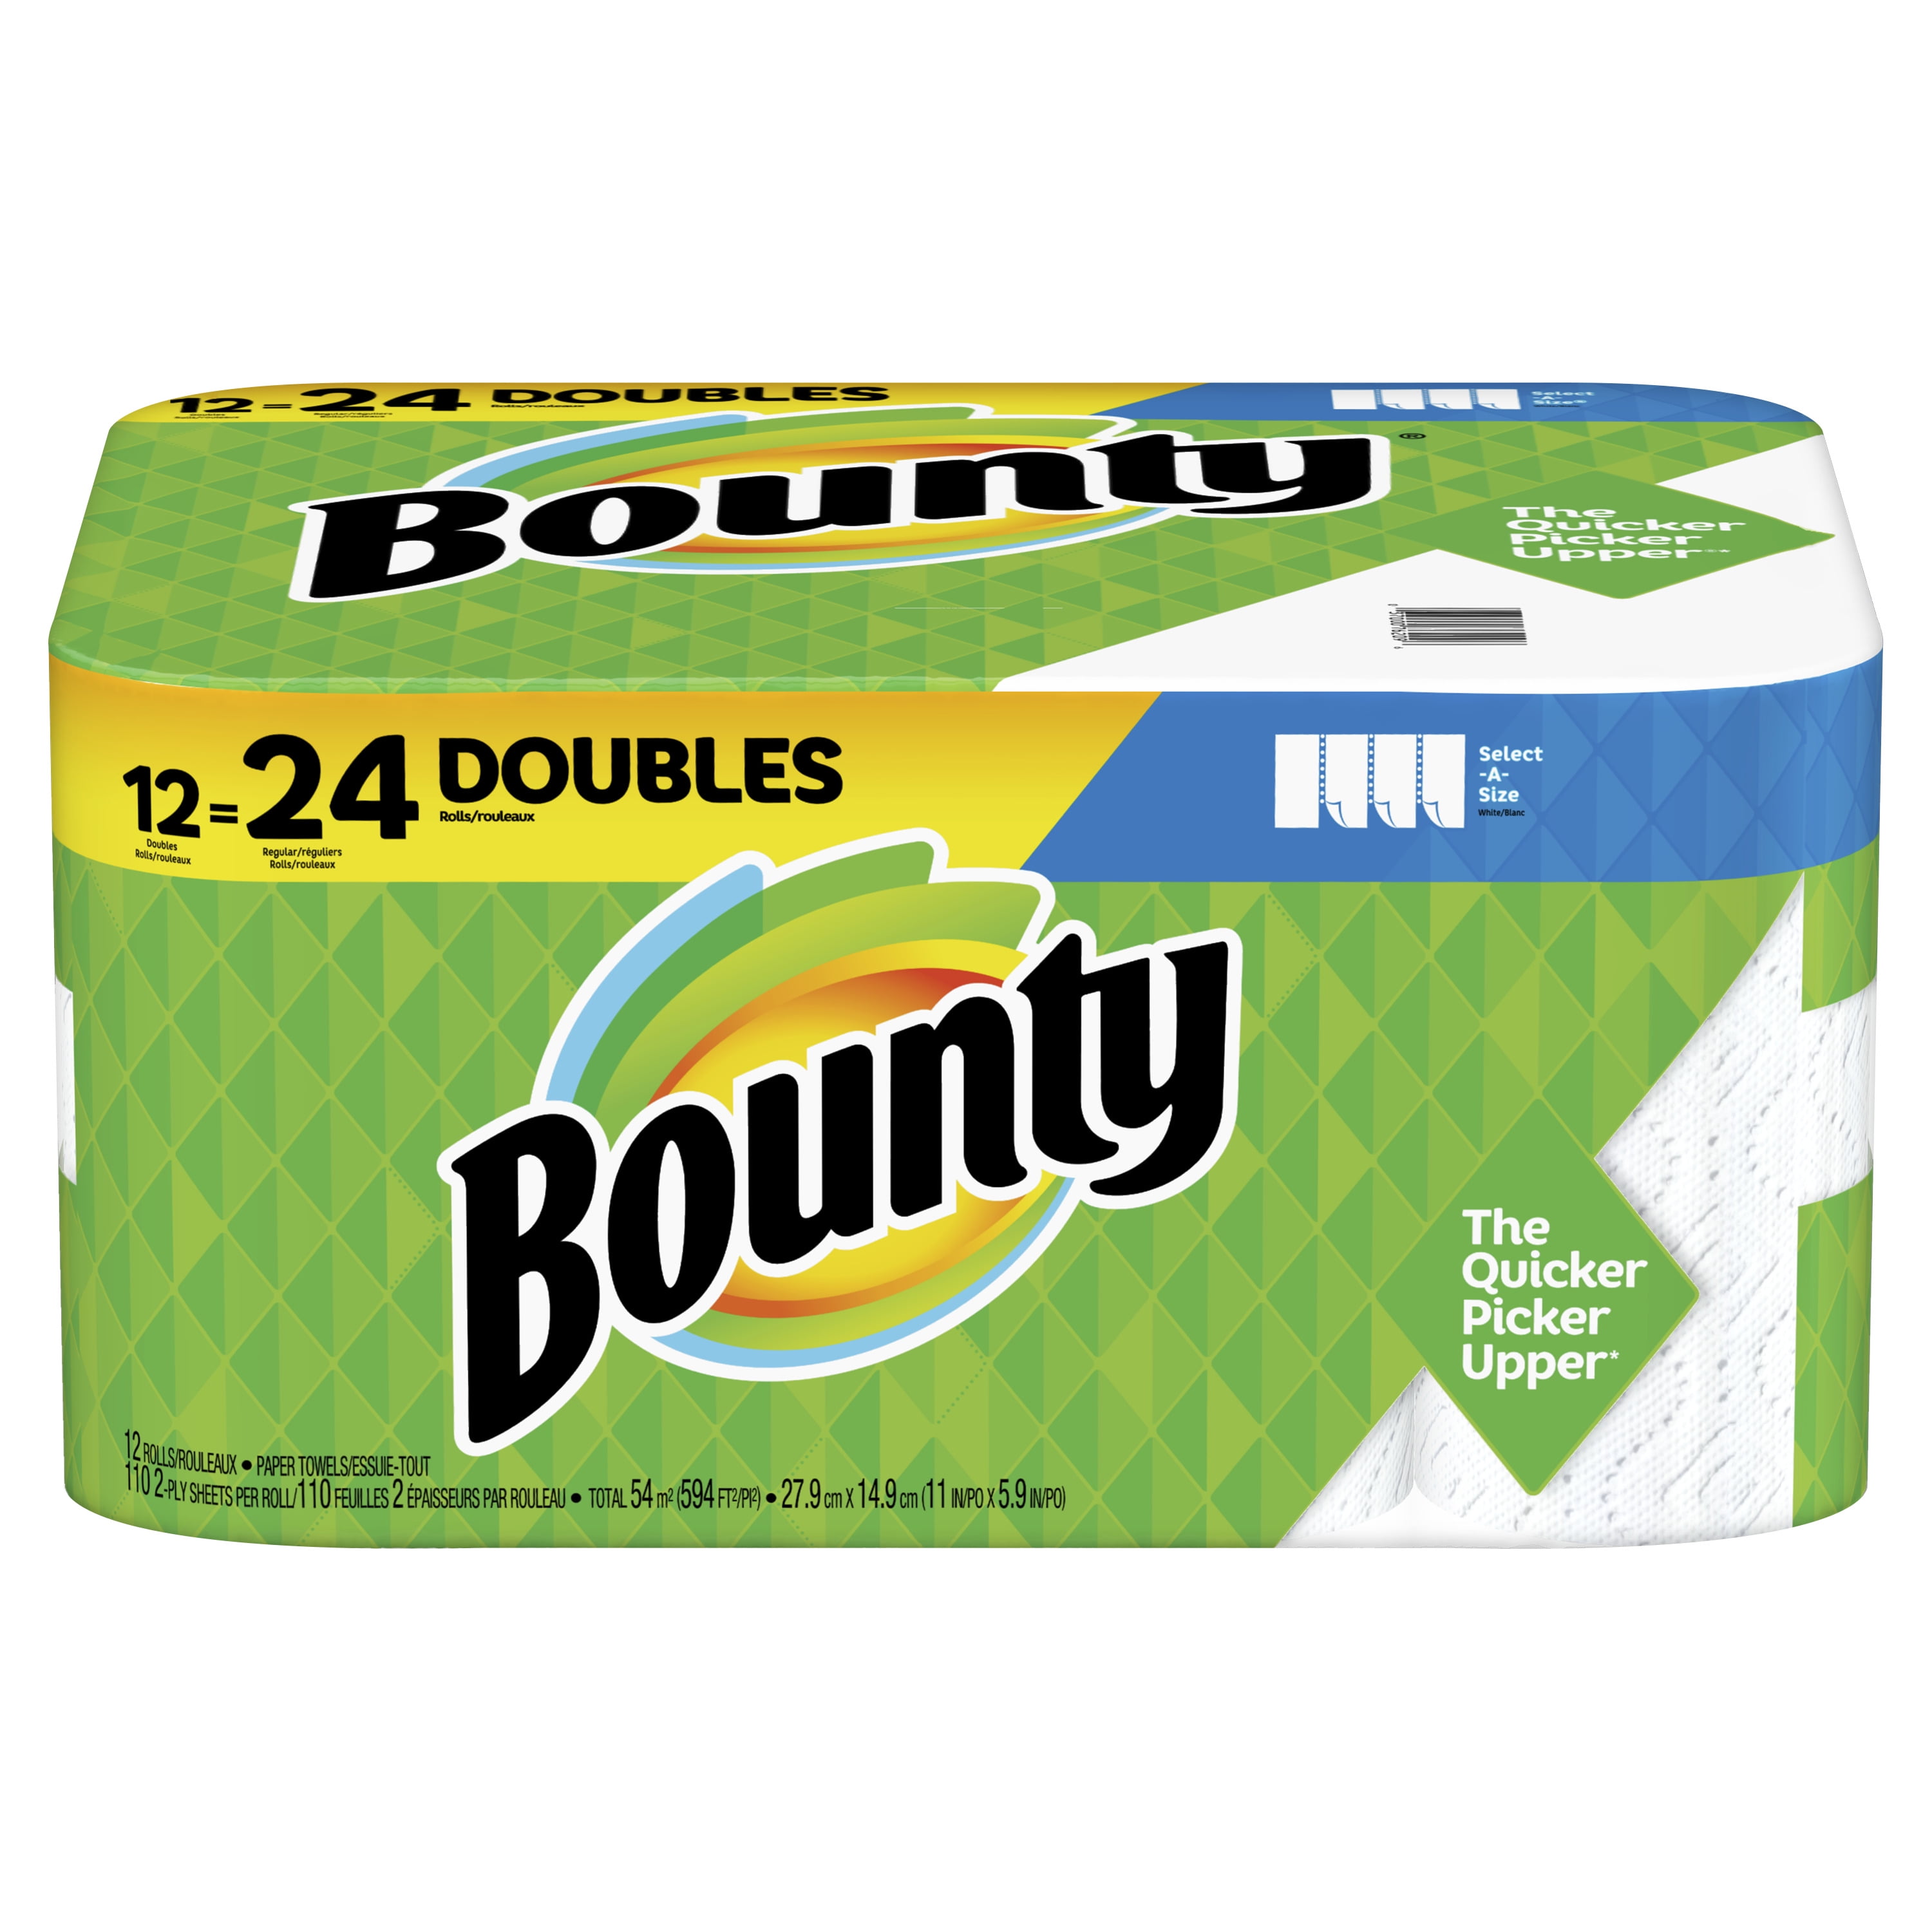 Bounty Select-A-Size Paper Towels 2X more absorbent 12 Double Rolls